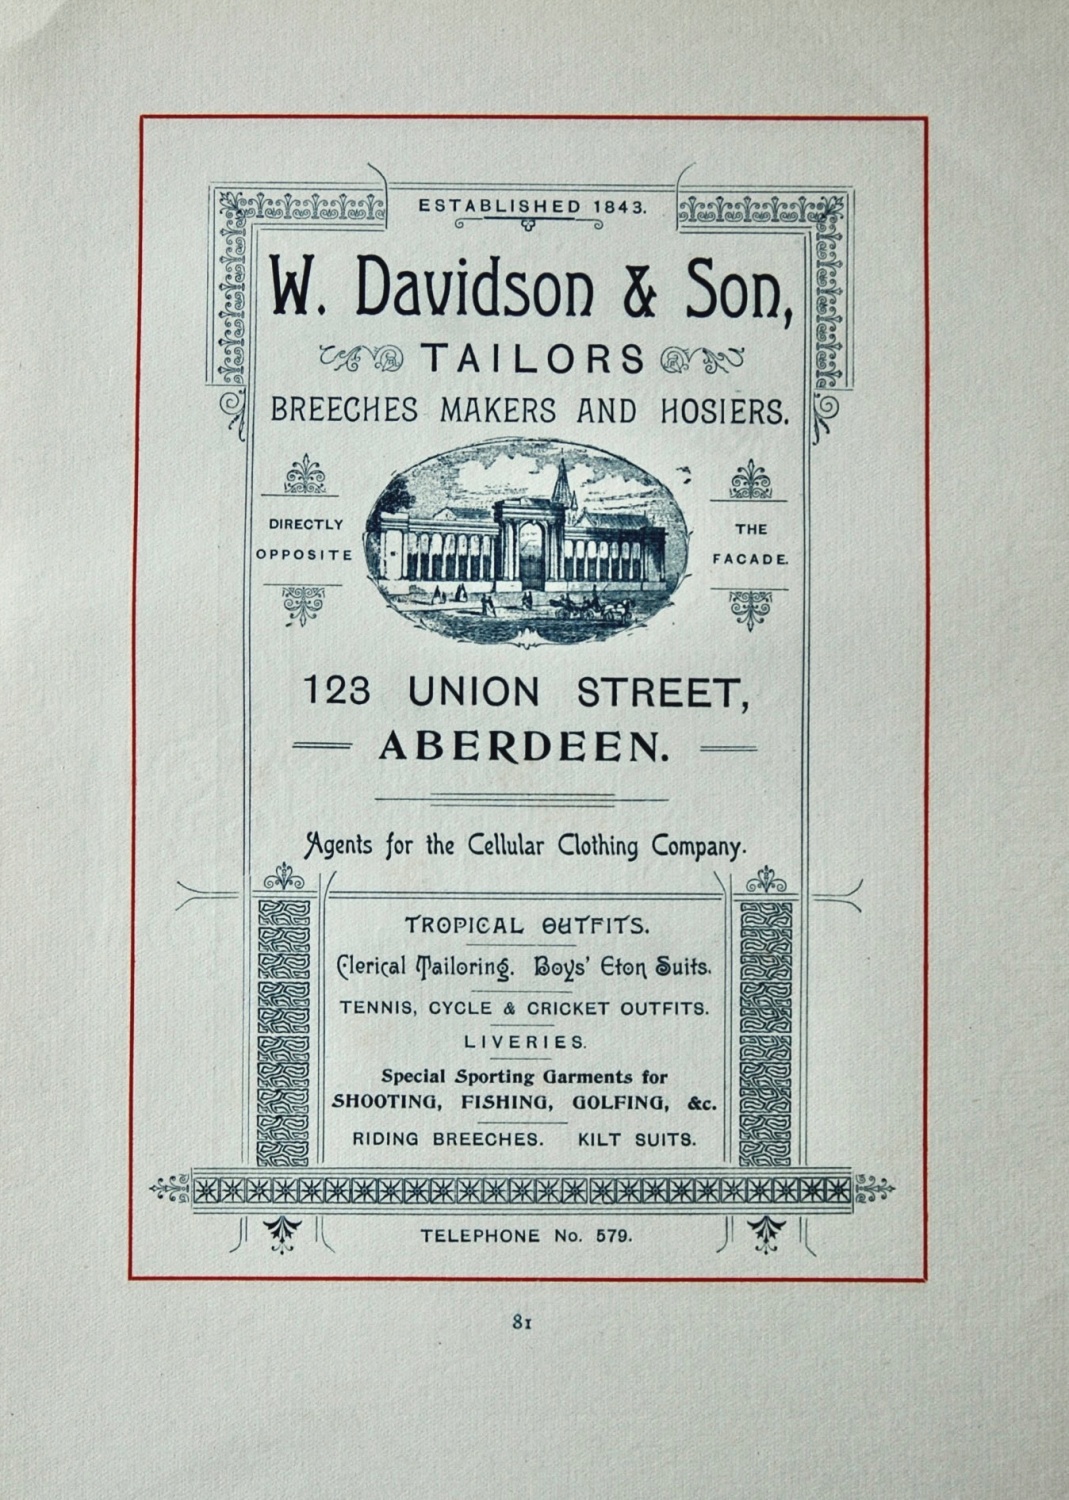 W. Davidson & Son, Tailors, Breeches Makers and Hosiers. 123 Union Street, 